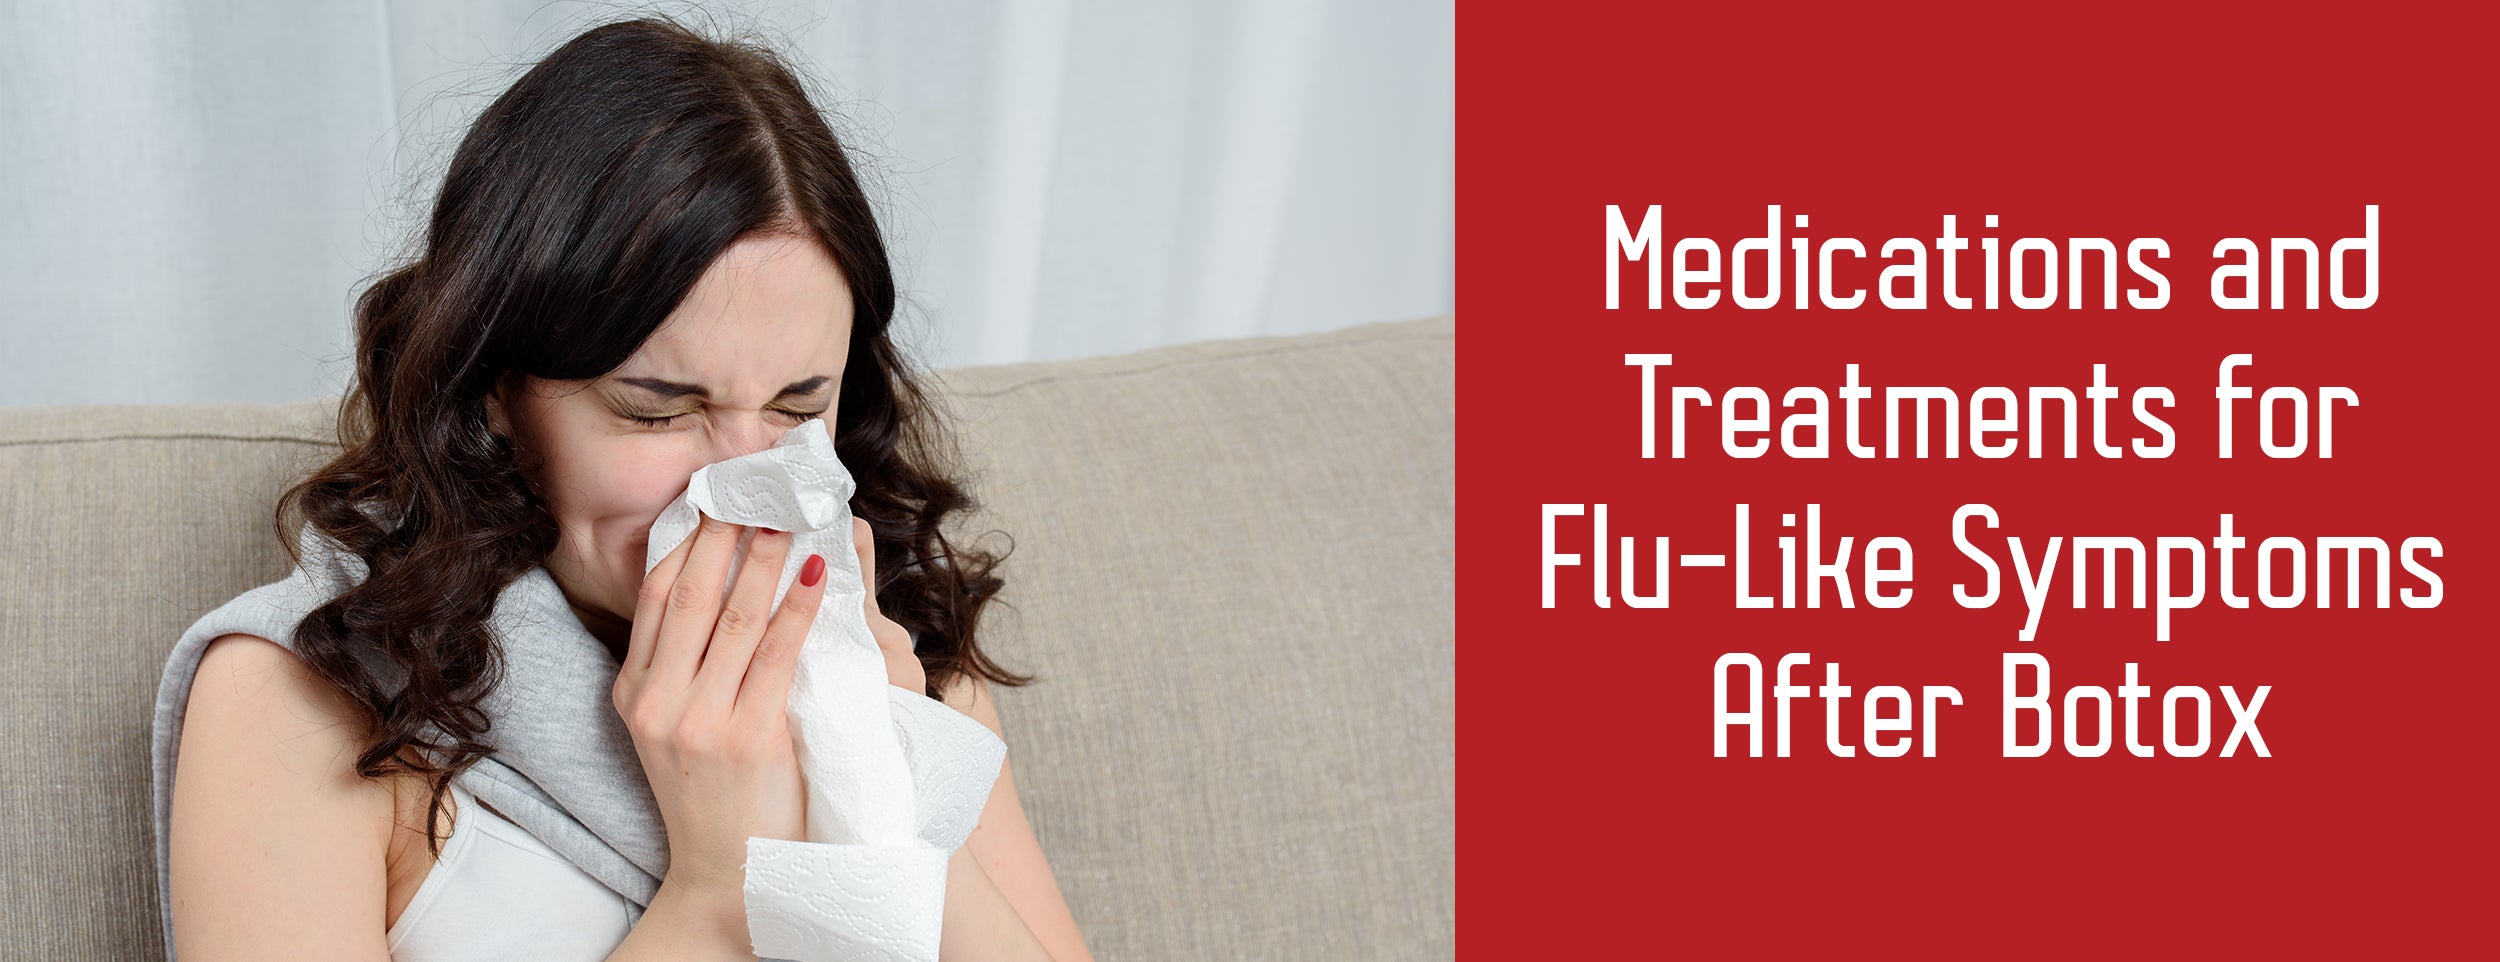 Flu-like symptoms after Botox: Medications and Treatments